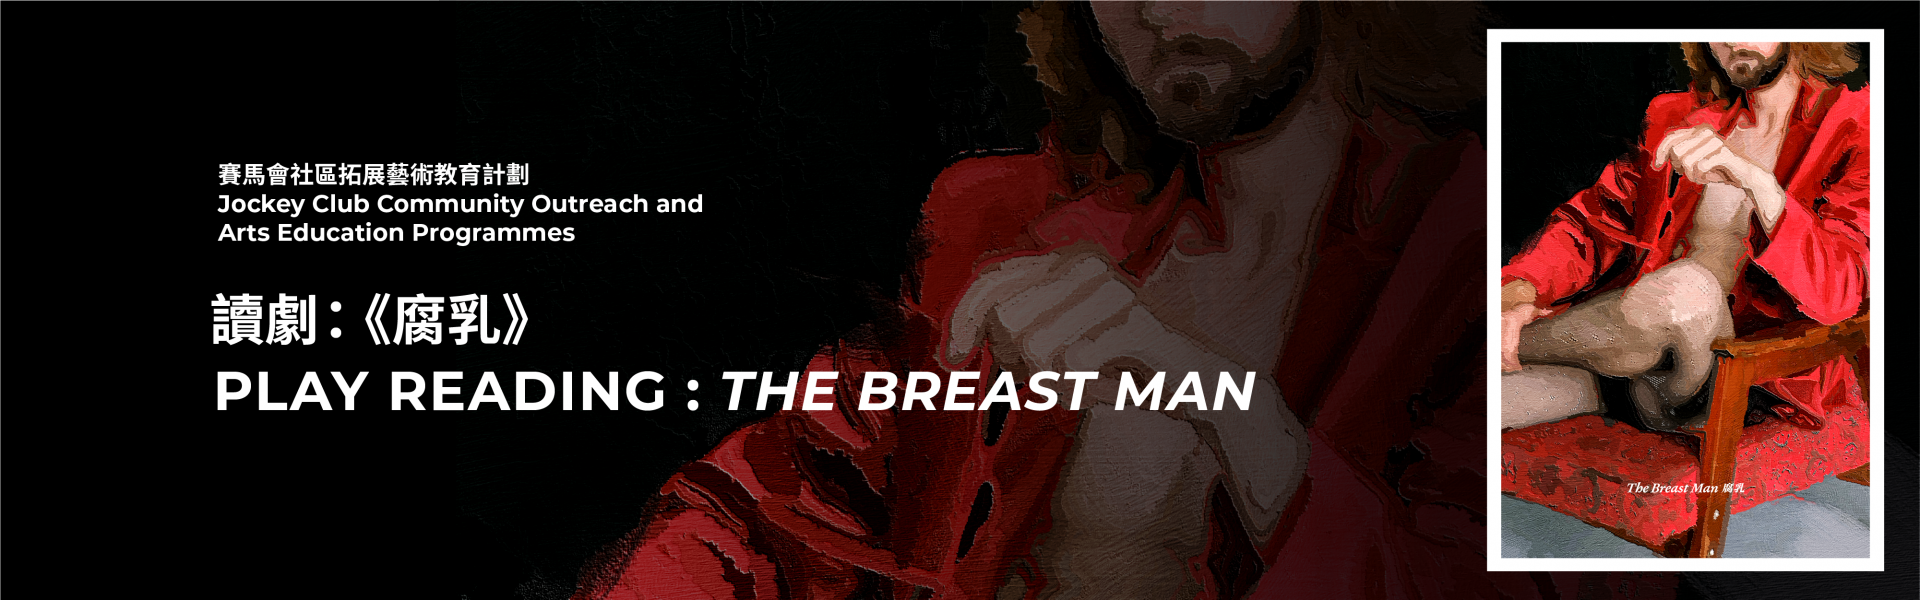 The Breast Man